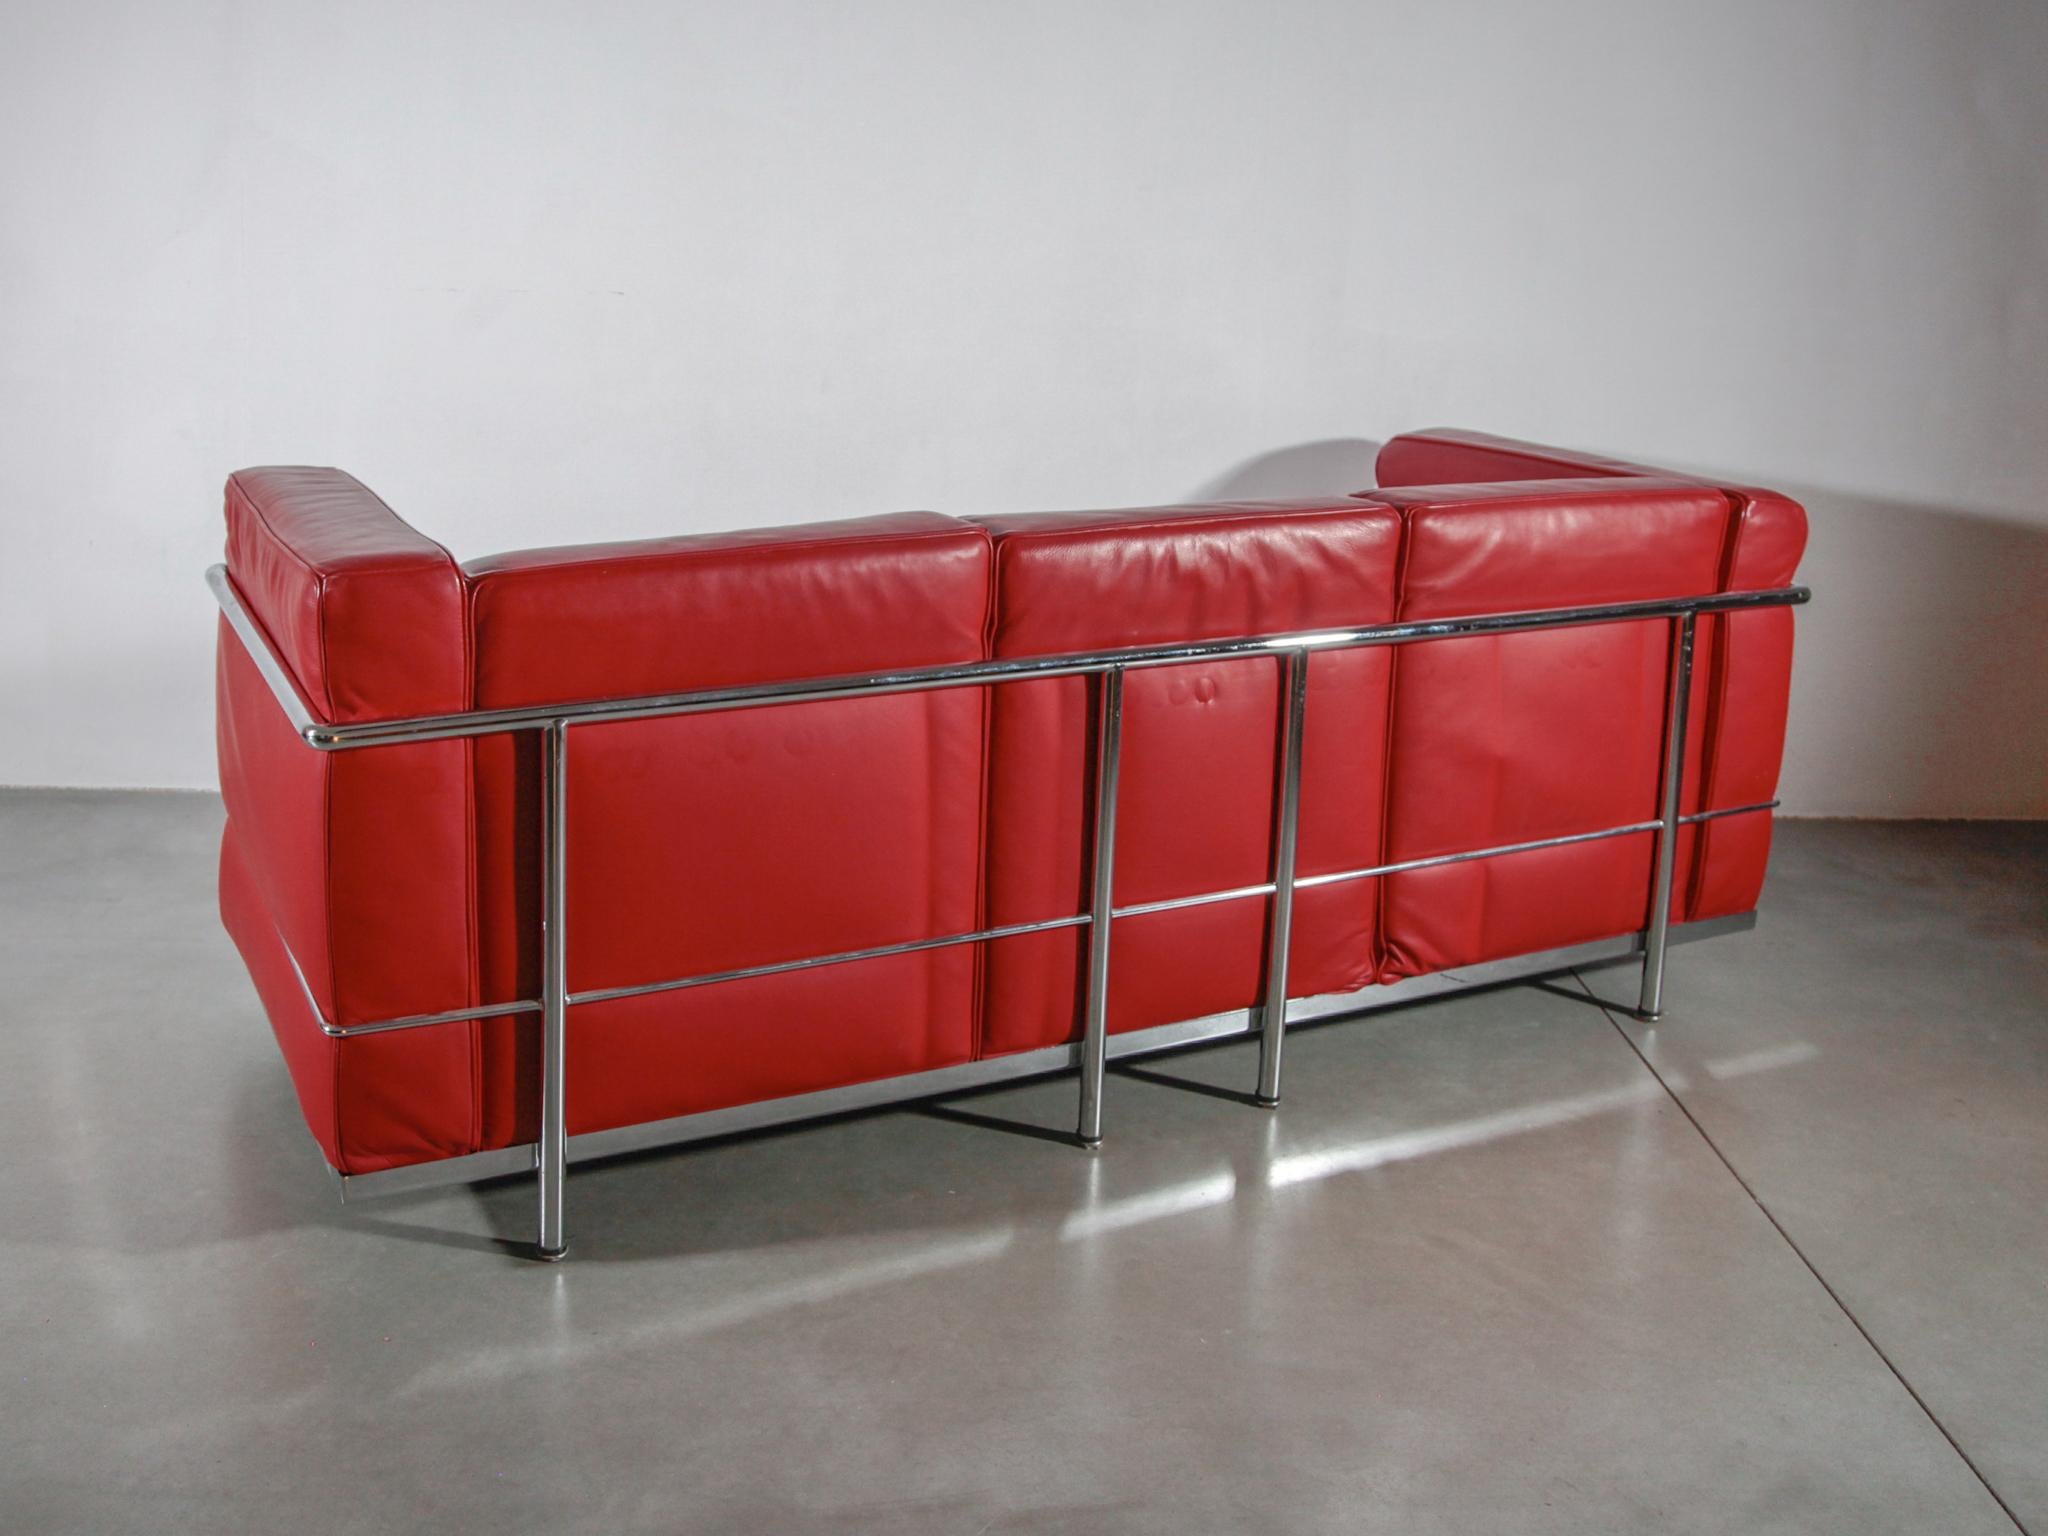 Late 20th Century Mid-century Modern Three Seat Sofa In Red Leather, 1980s attributed Le Corbusier